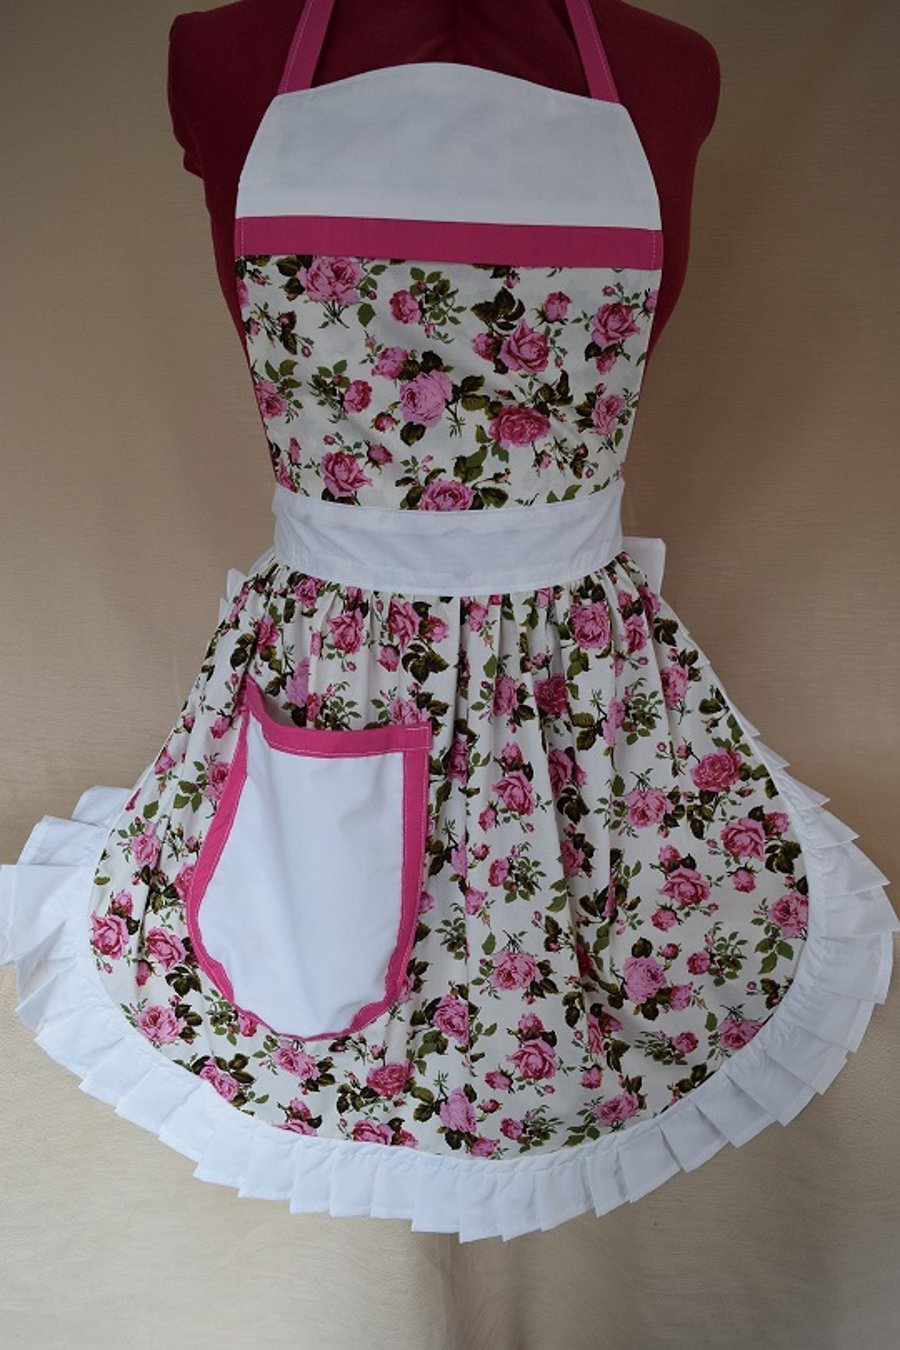 Vintage 50s Style Full Apron Pinny - Pink Roses with Cream Trim